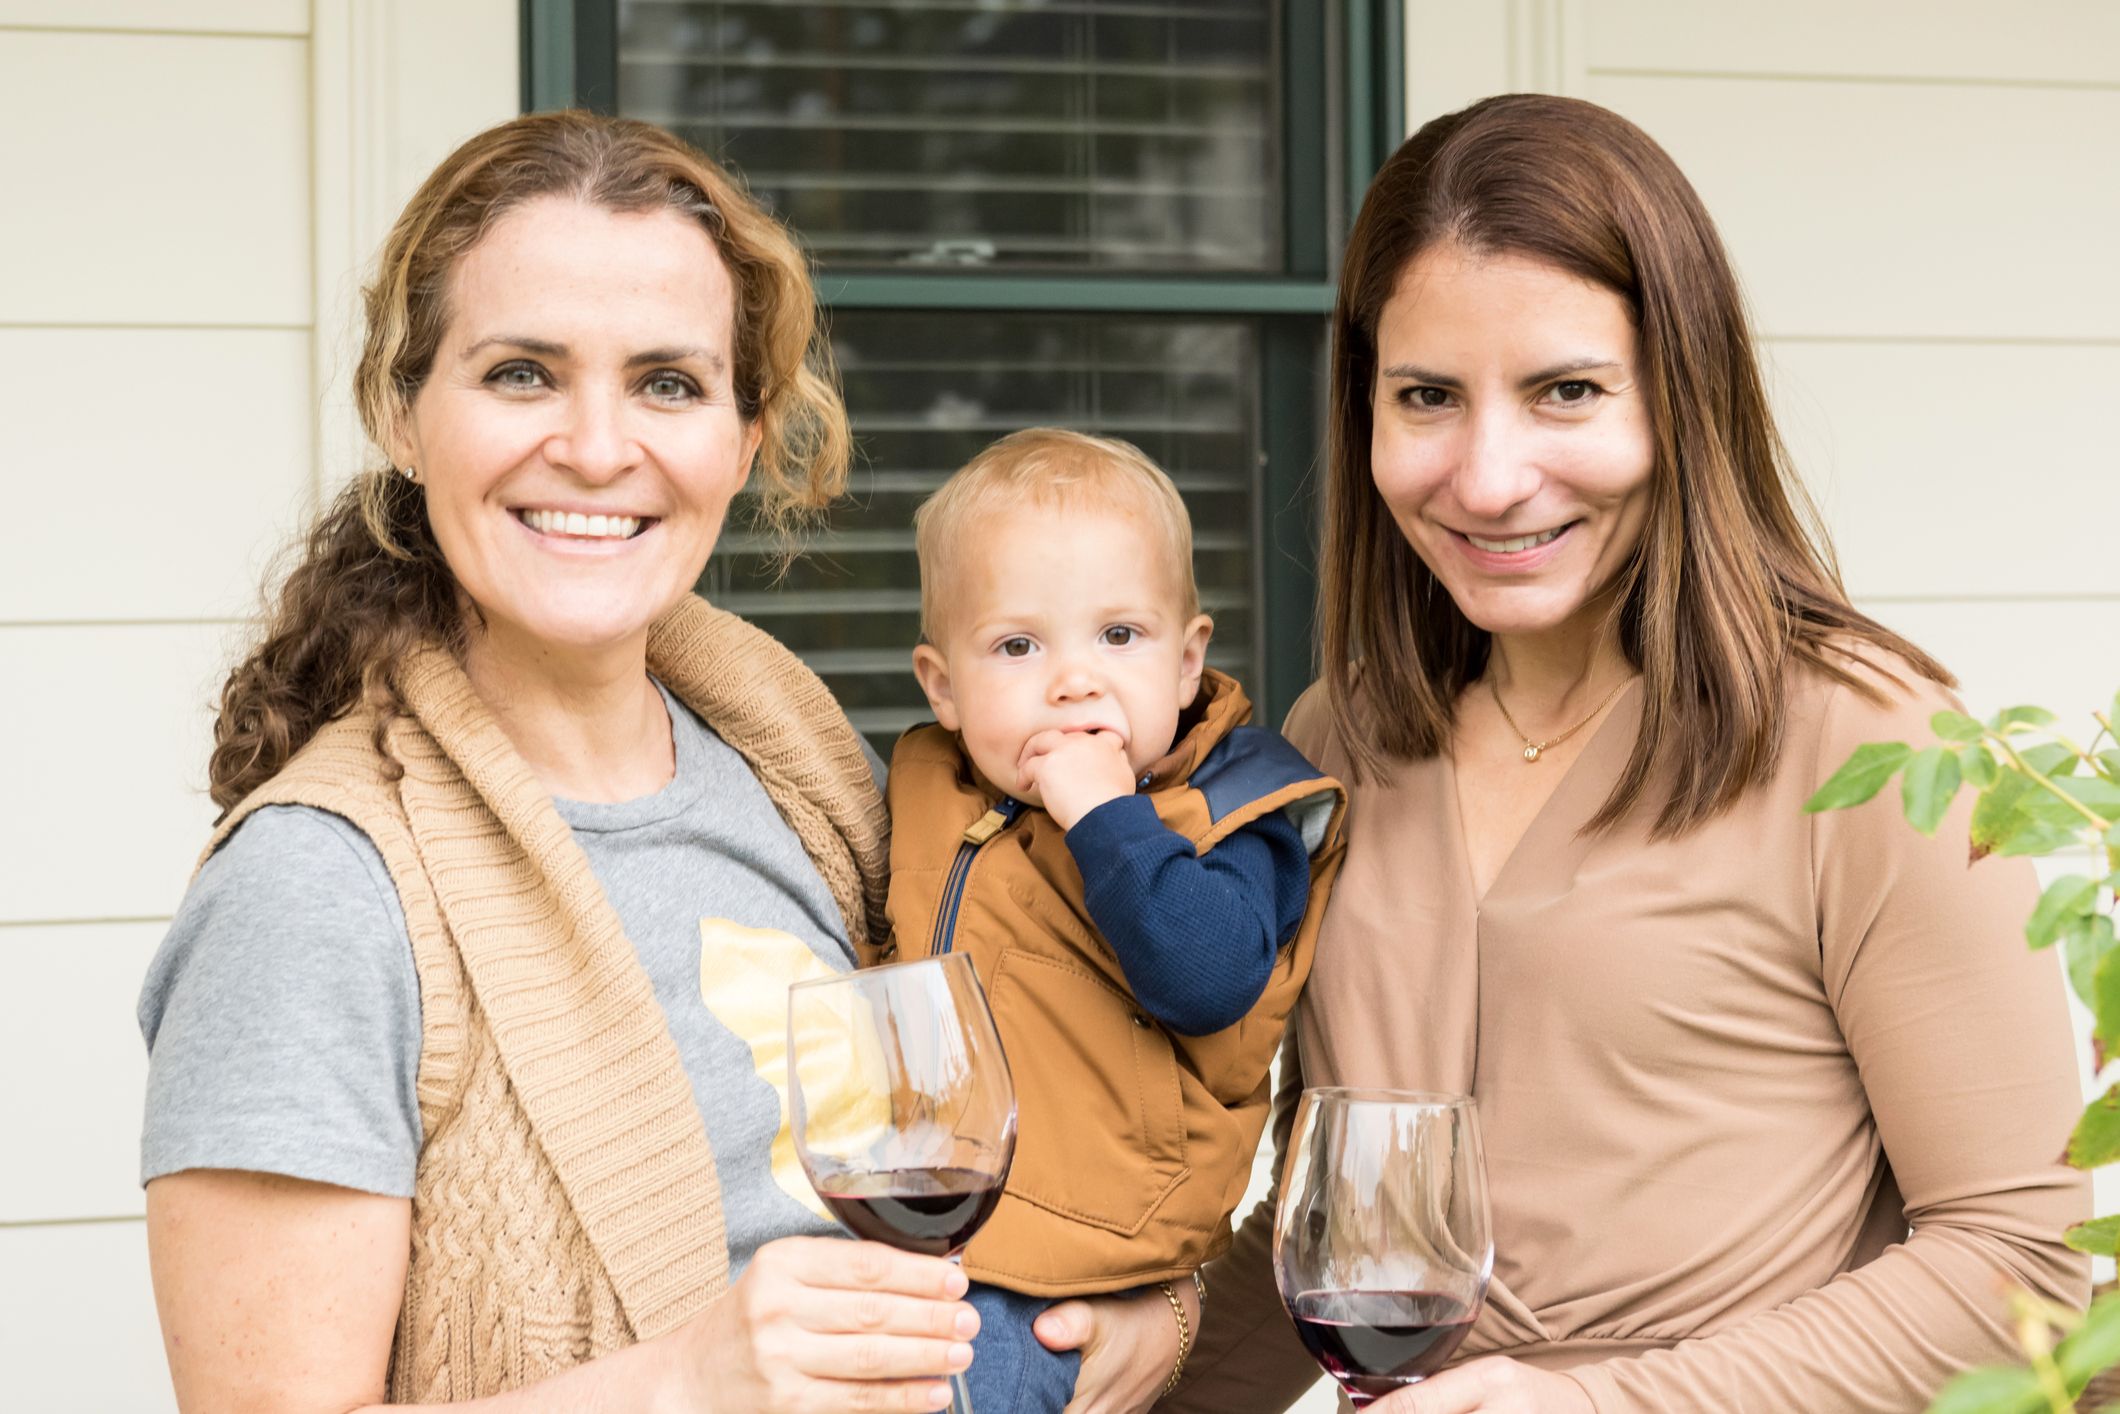 Hitting the Booze: The Mommy Drinking Culture